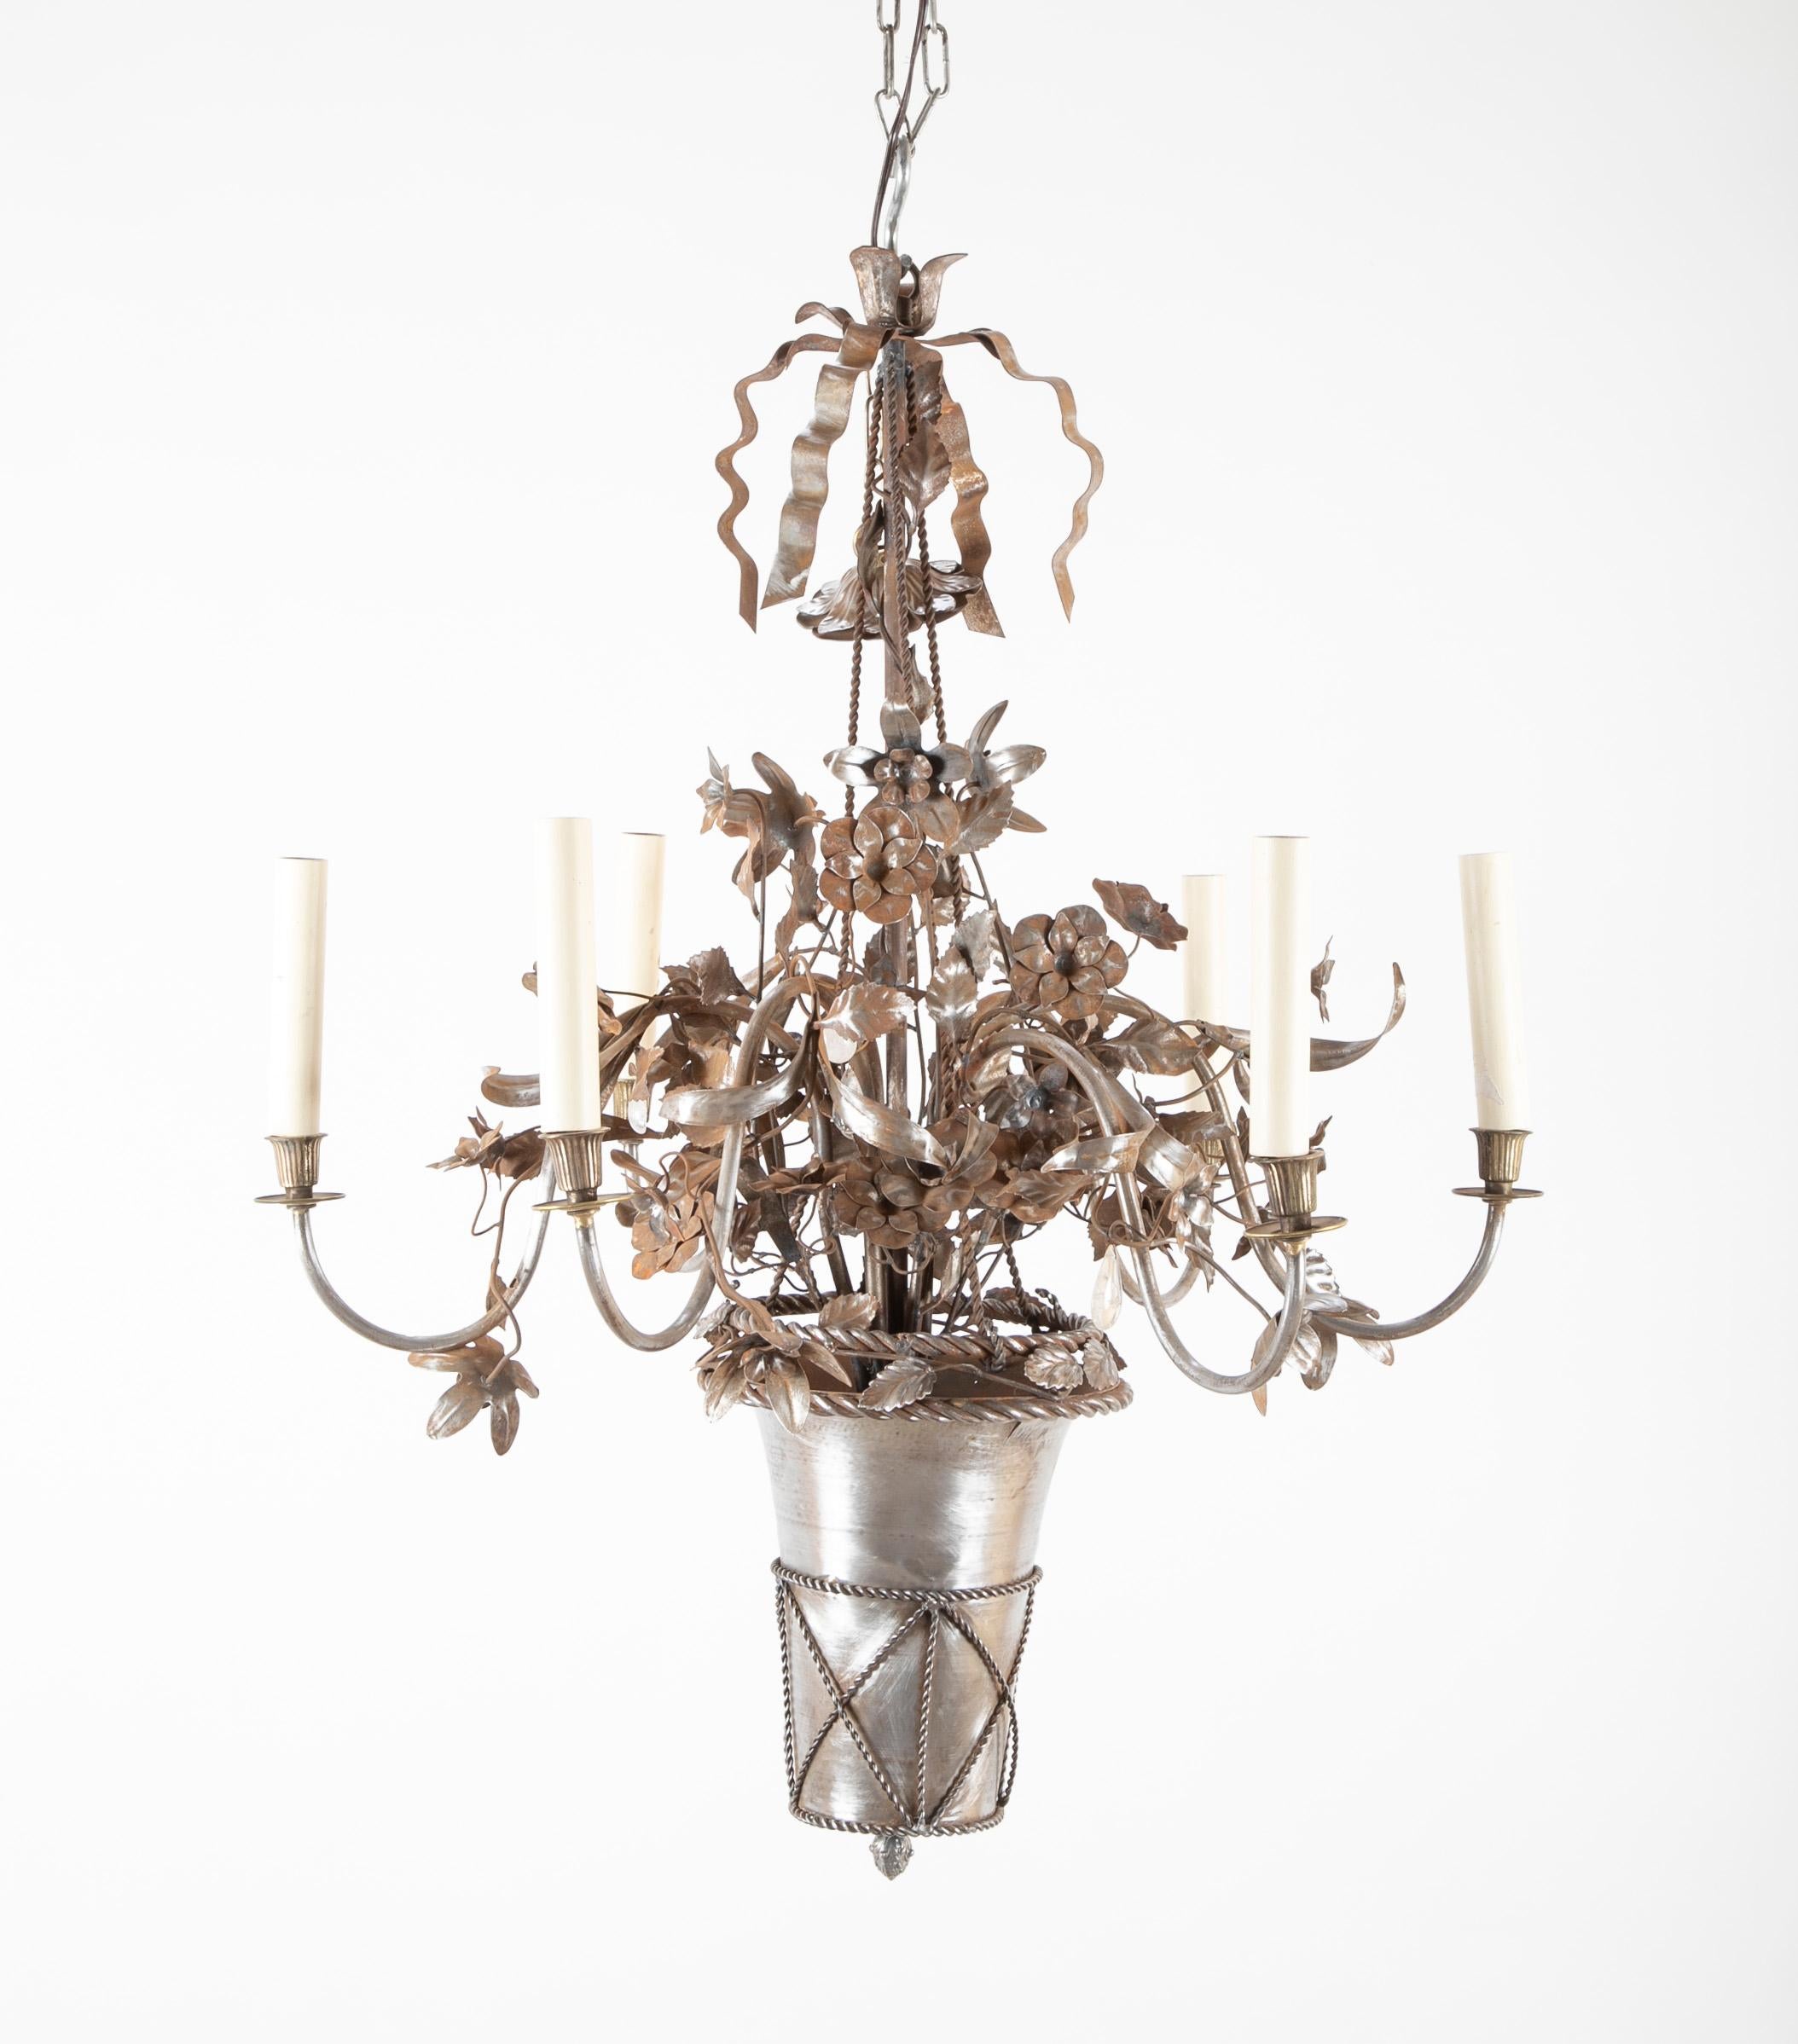 Vintage steel floral chandelier with basket, bow knots and ribbons.